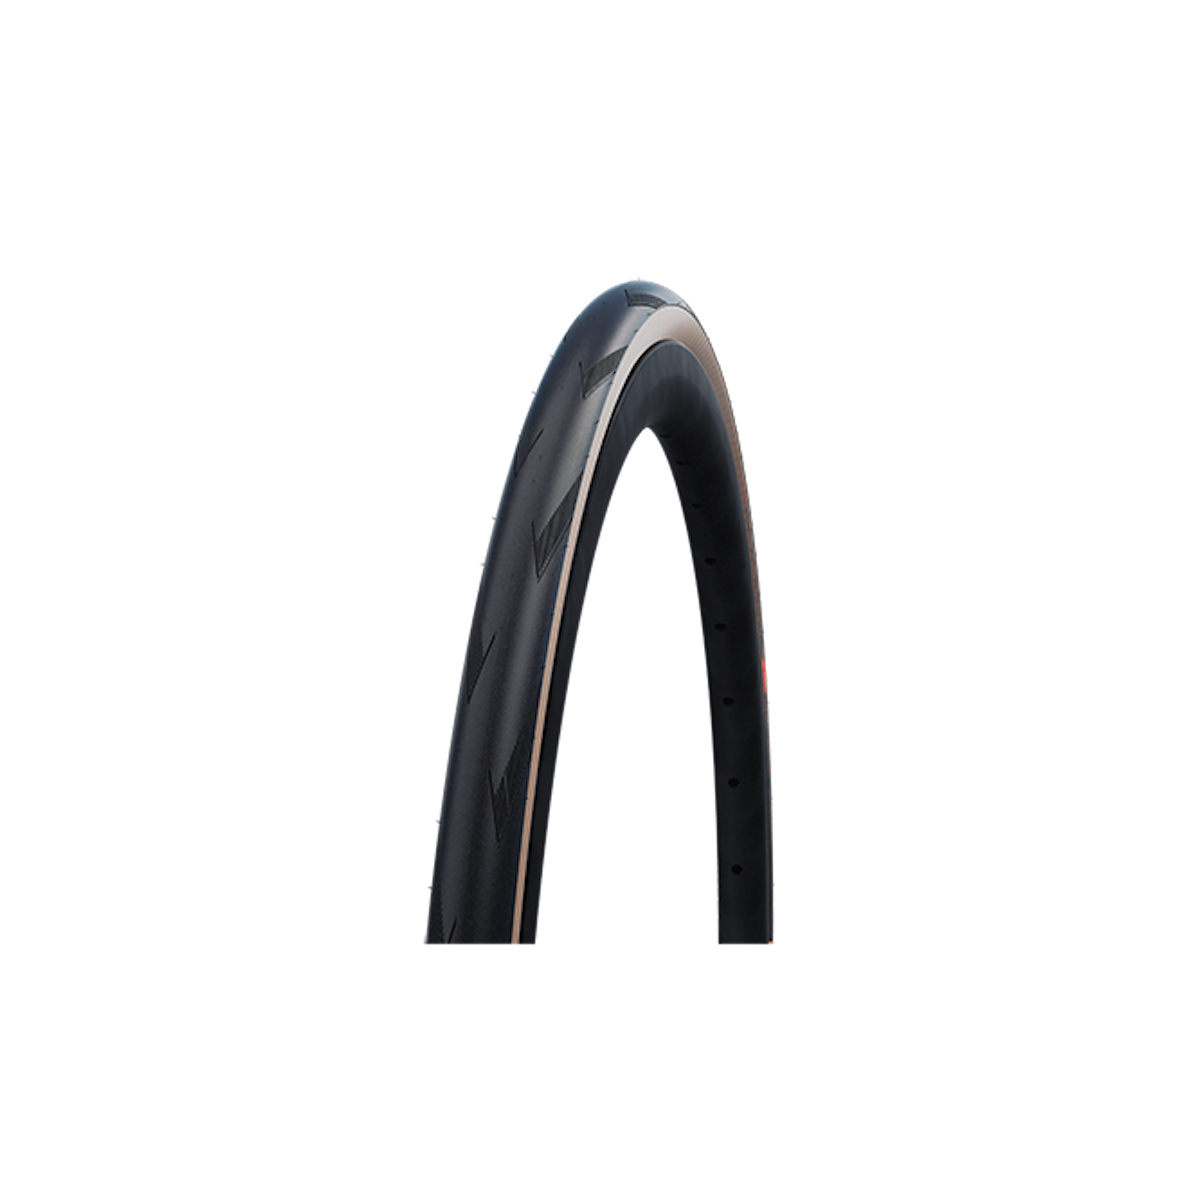 SCHWALBE PRO ONE 700 X 32C tubeless tyre